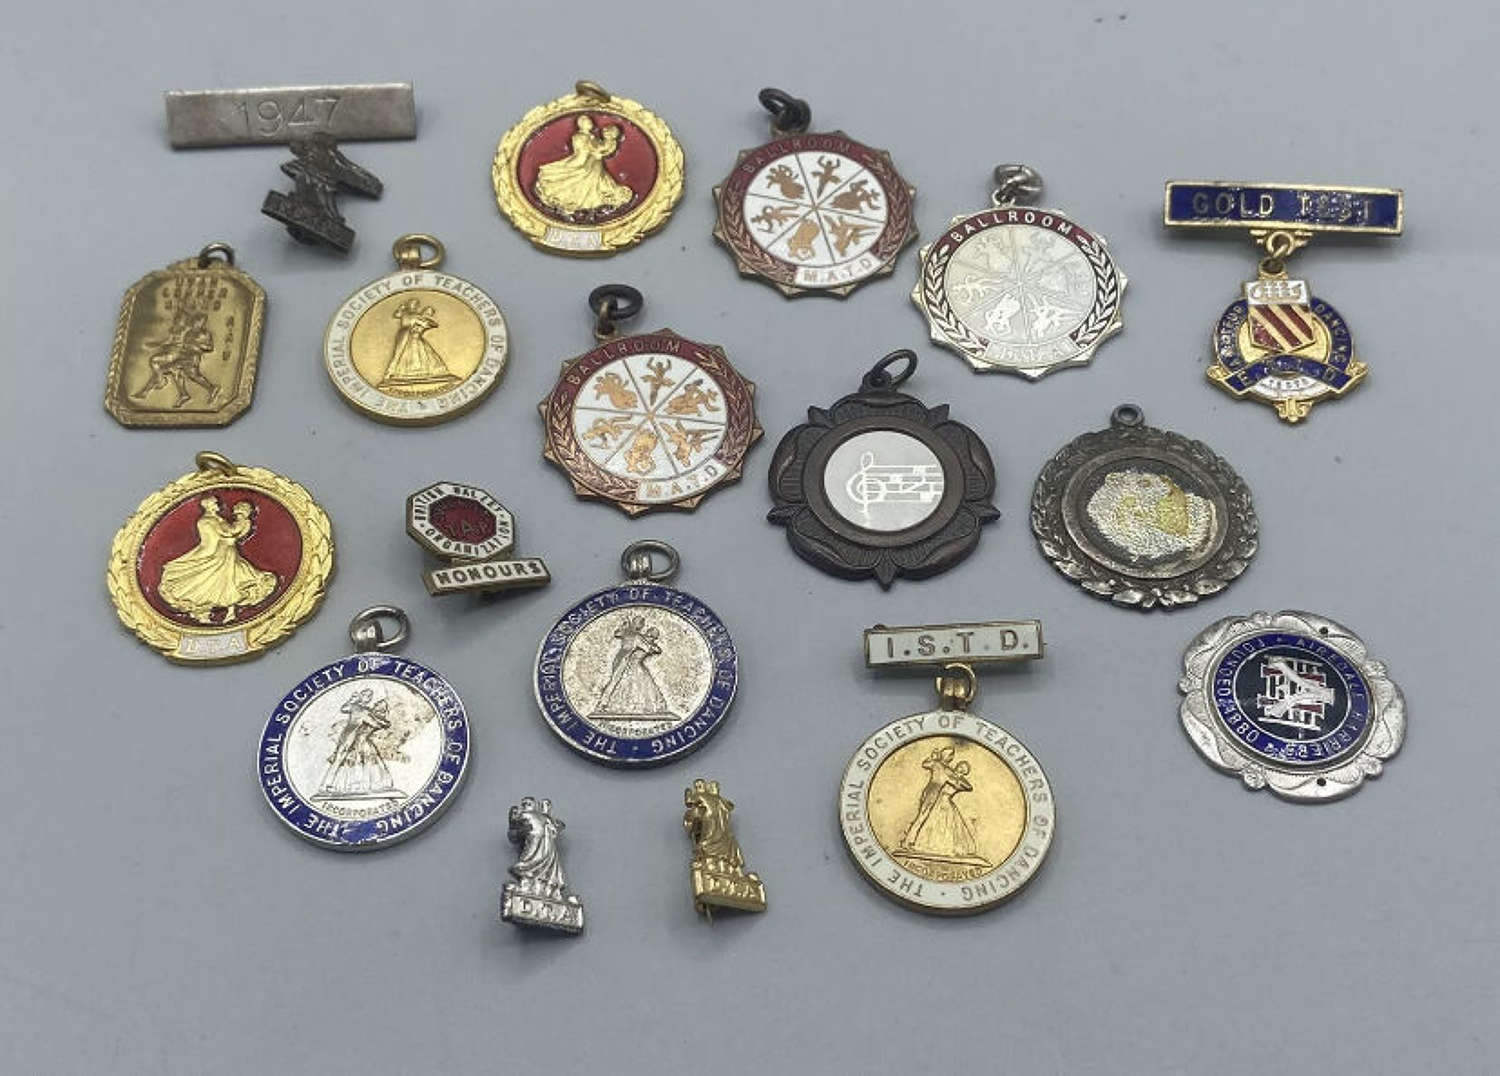 Vintage Collection Imperial Society of Teachers of Dancing Medals